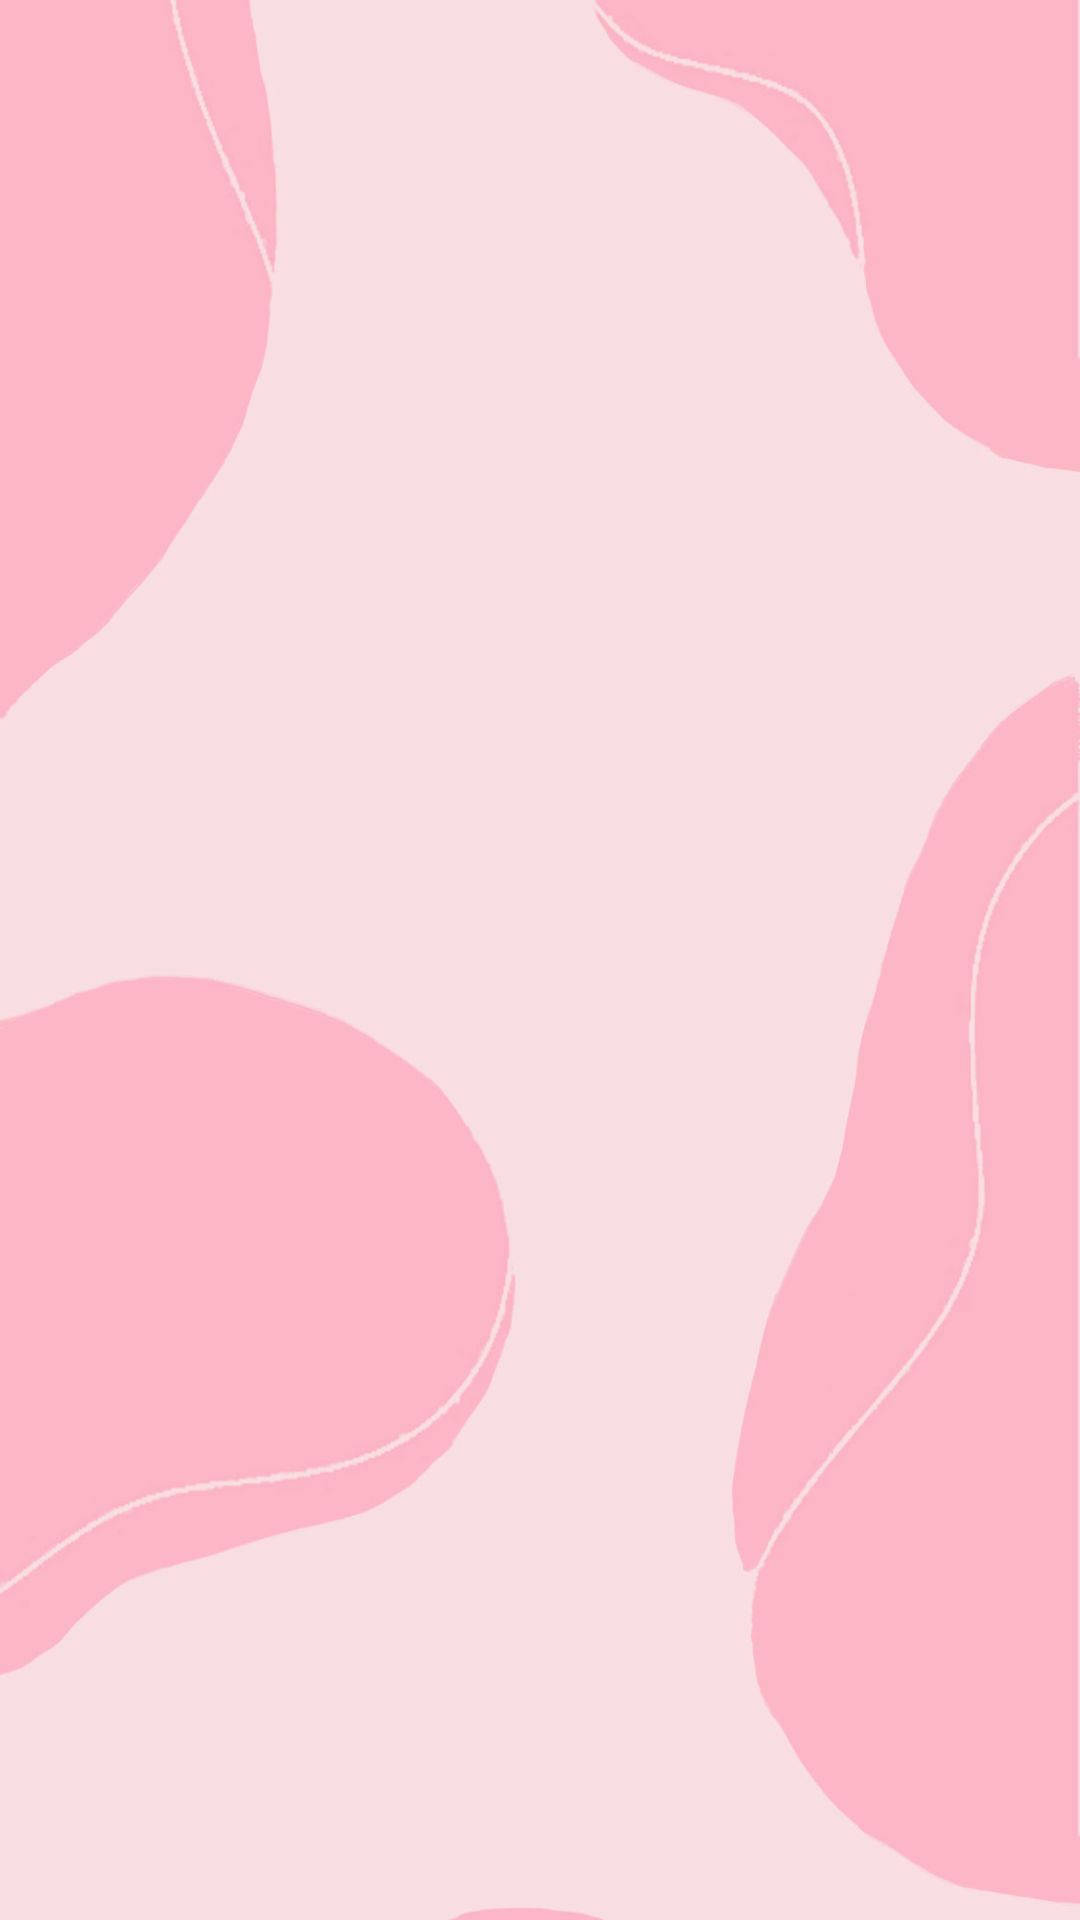 Aesthetic Pink Abstract Background